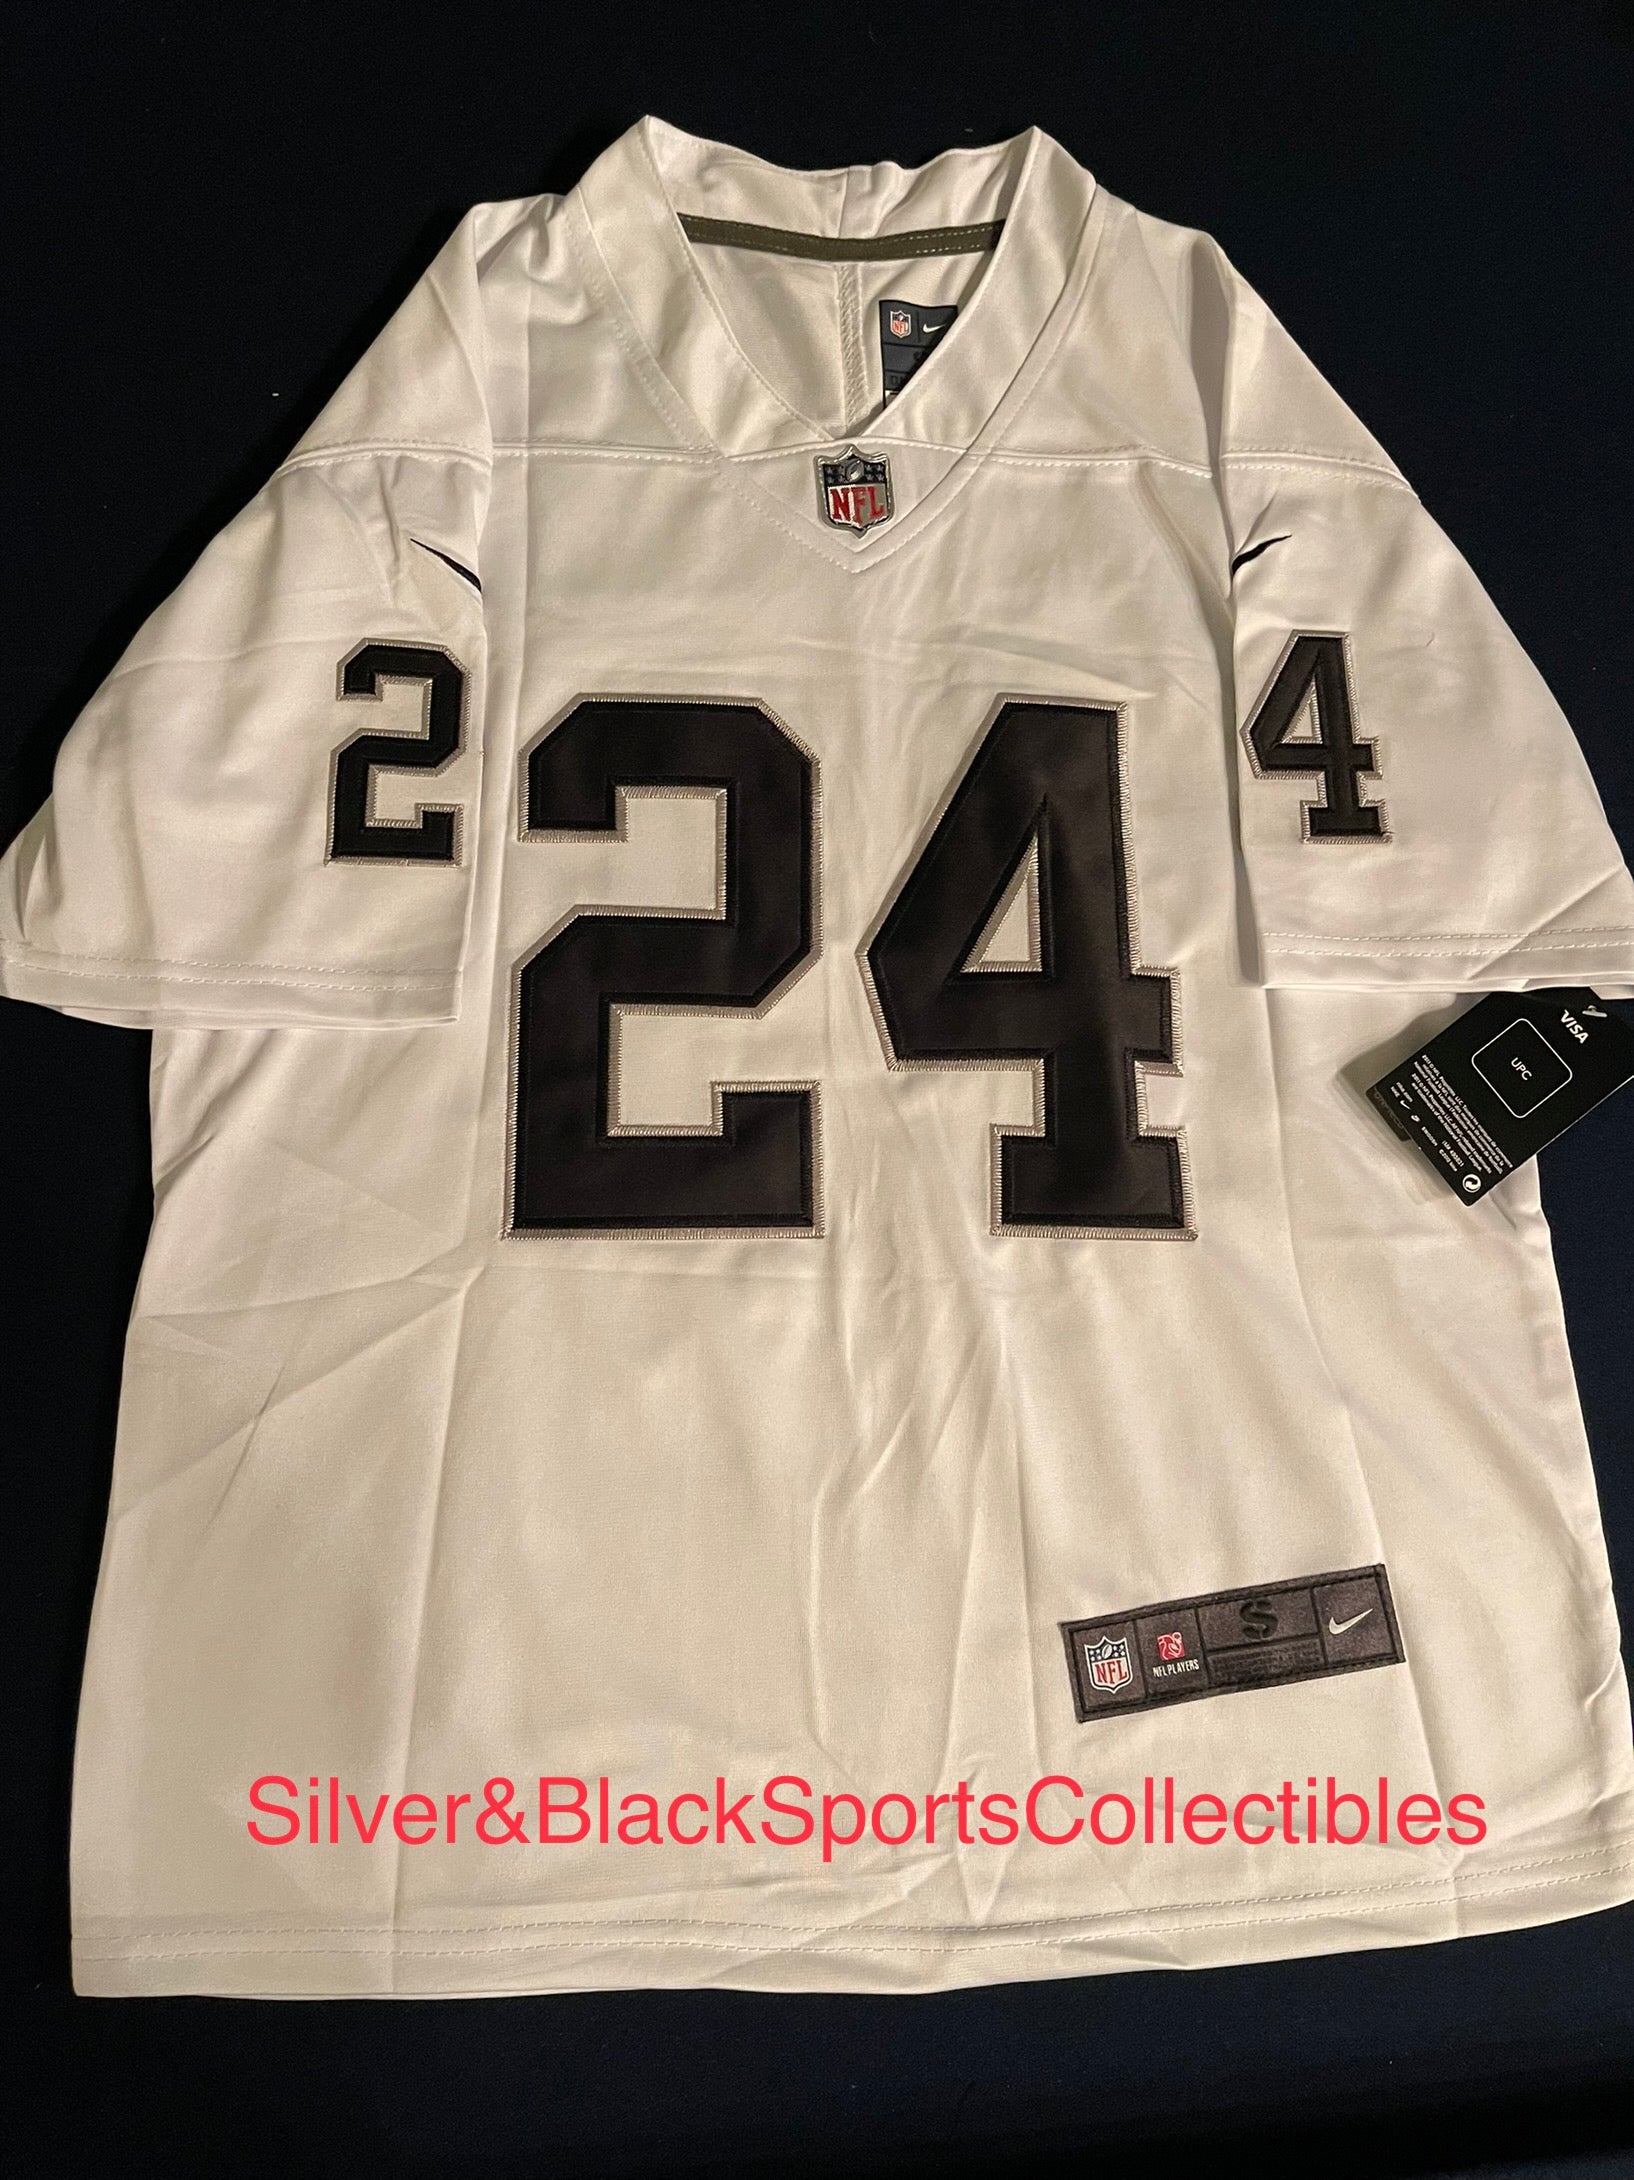 youth charles woodson jersey